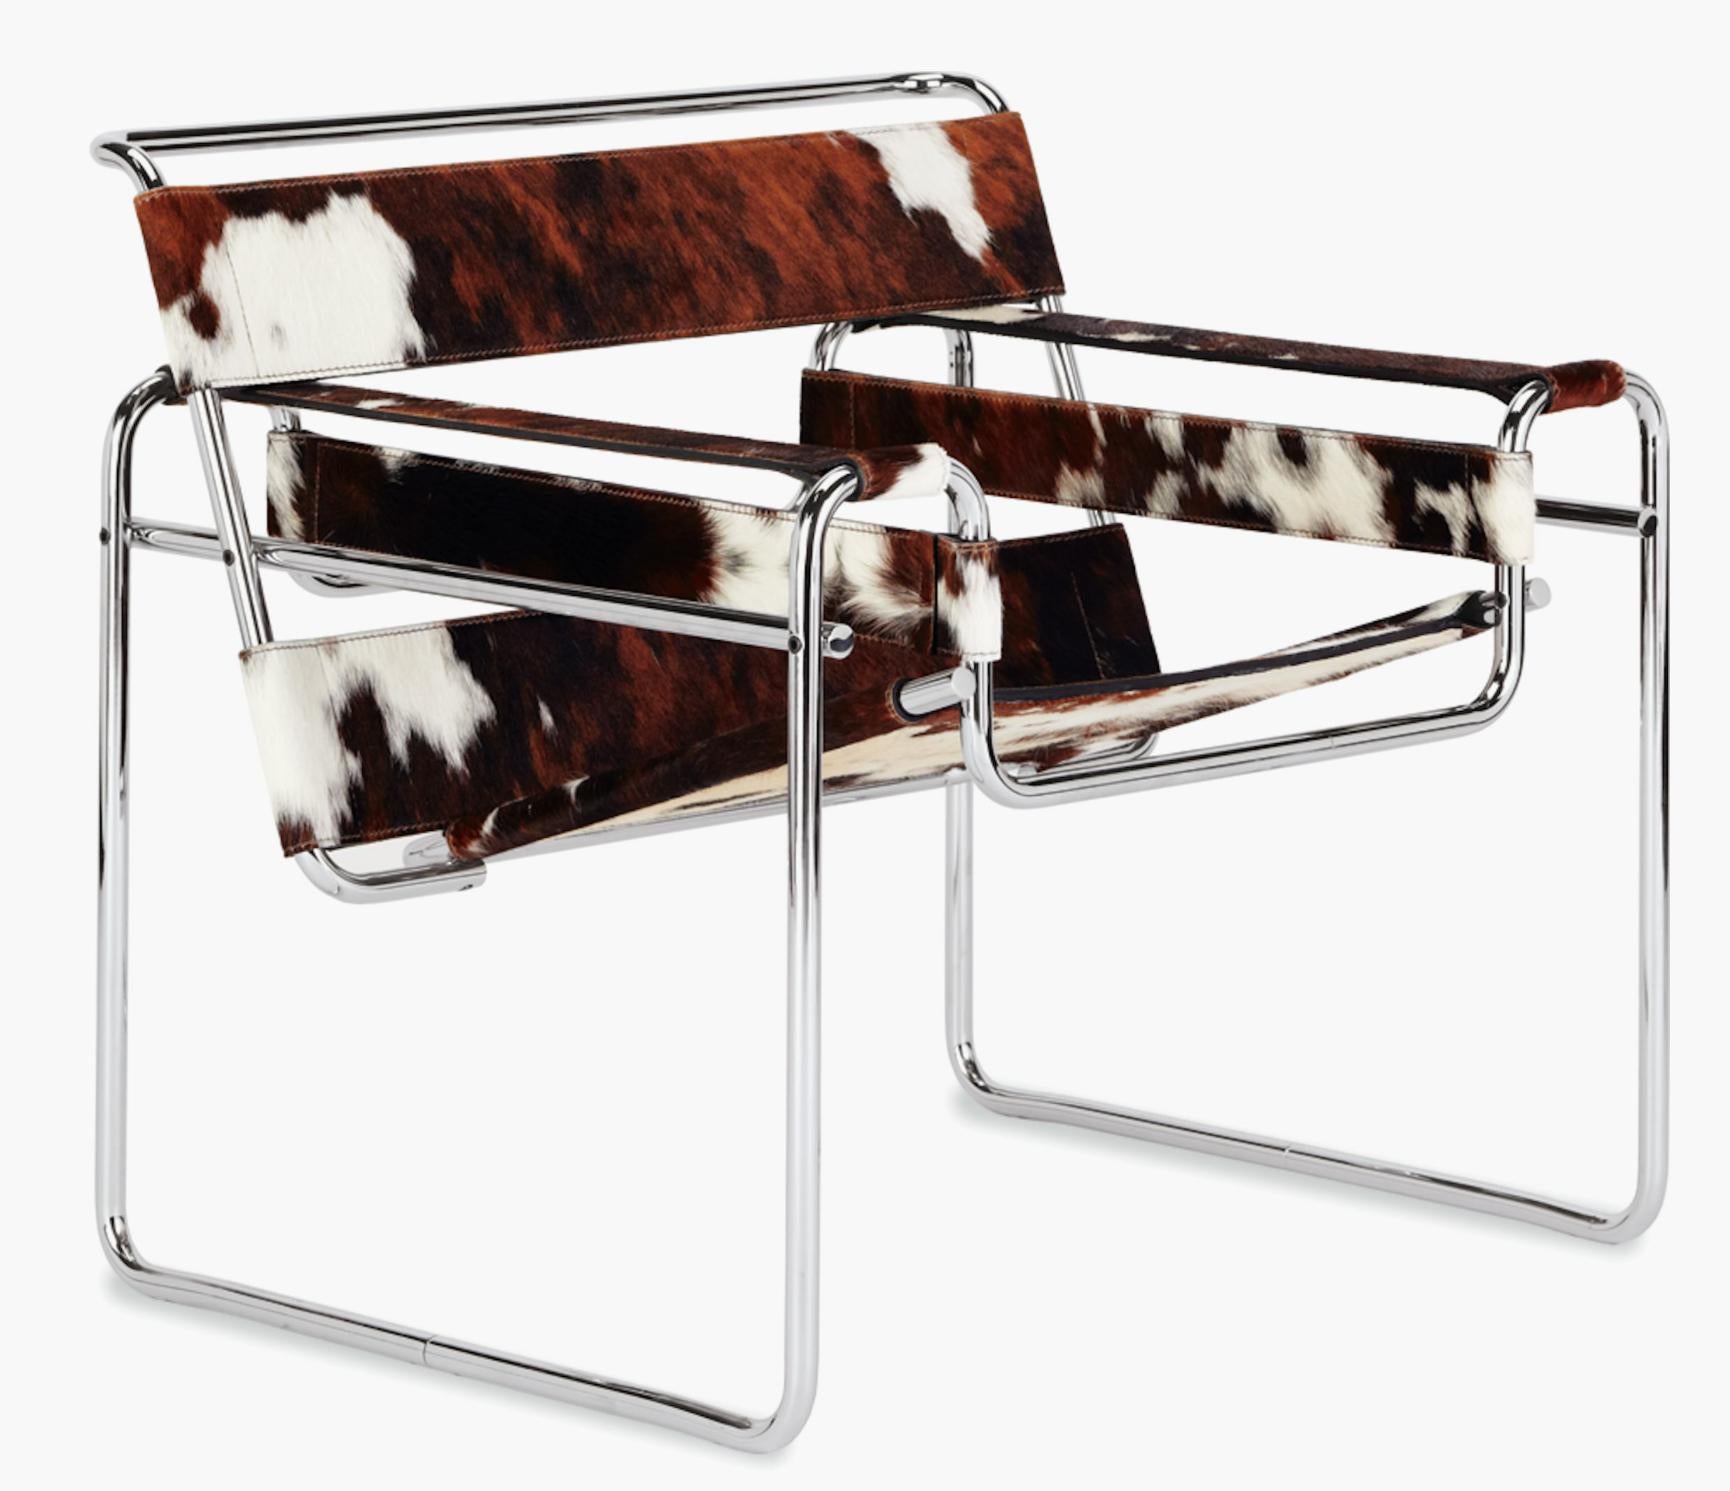 Italian Marcel Breuer Wassily Chair, Knoll Associates, Tri-colored Hide, Italy, 2000s For Sale